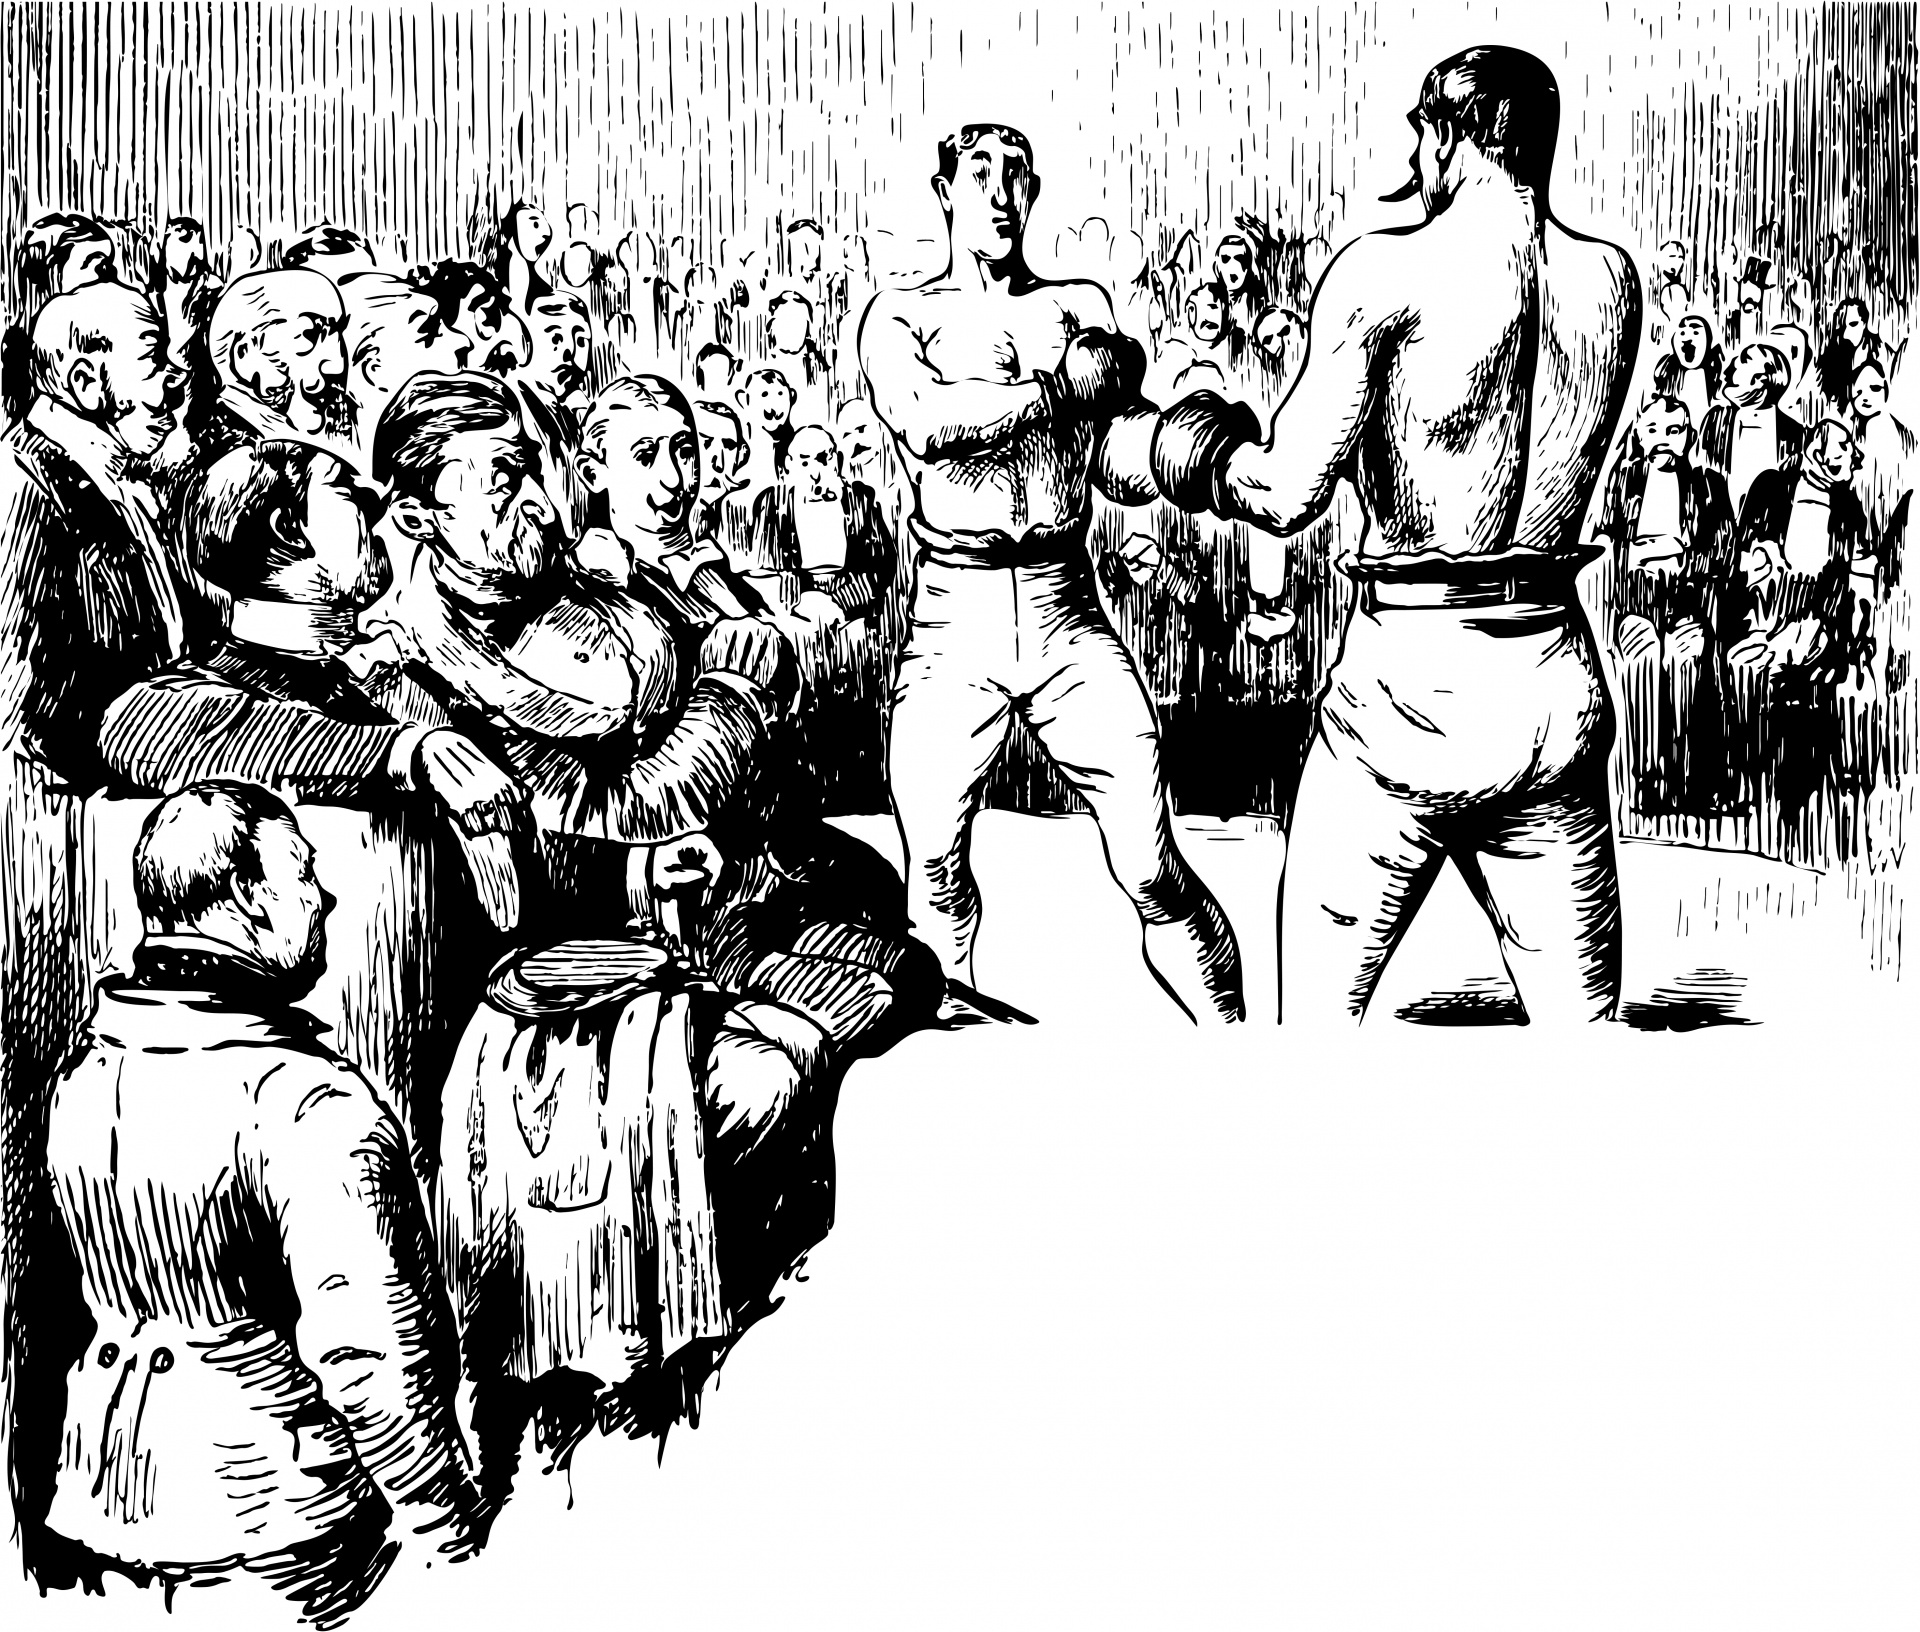 Re digitized vintage public domain illustration of a black and white boxing match.